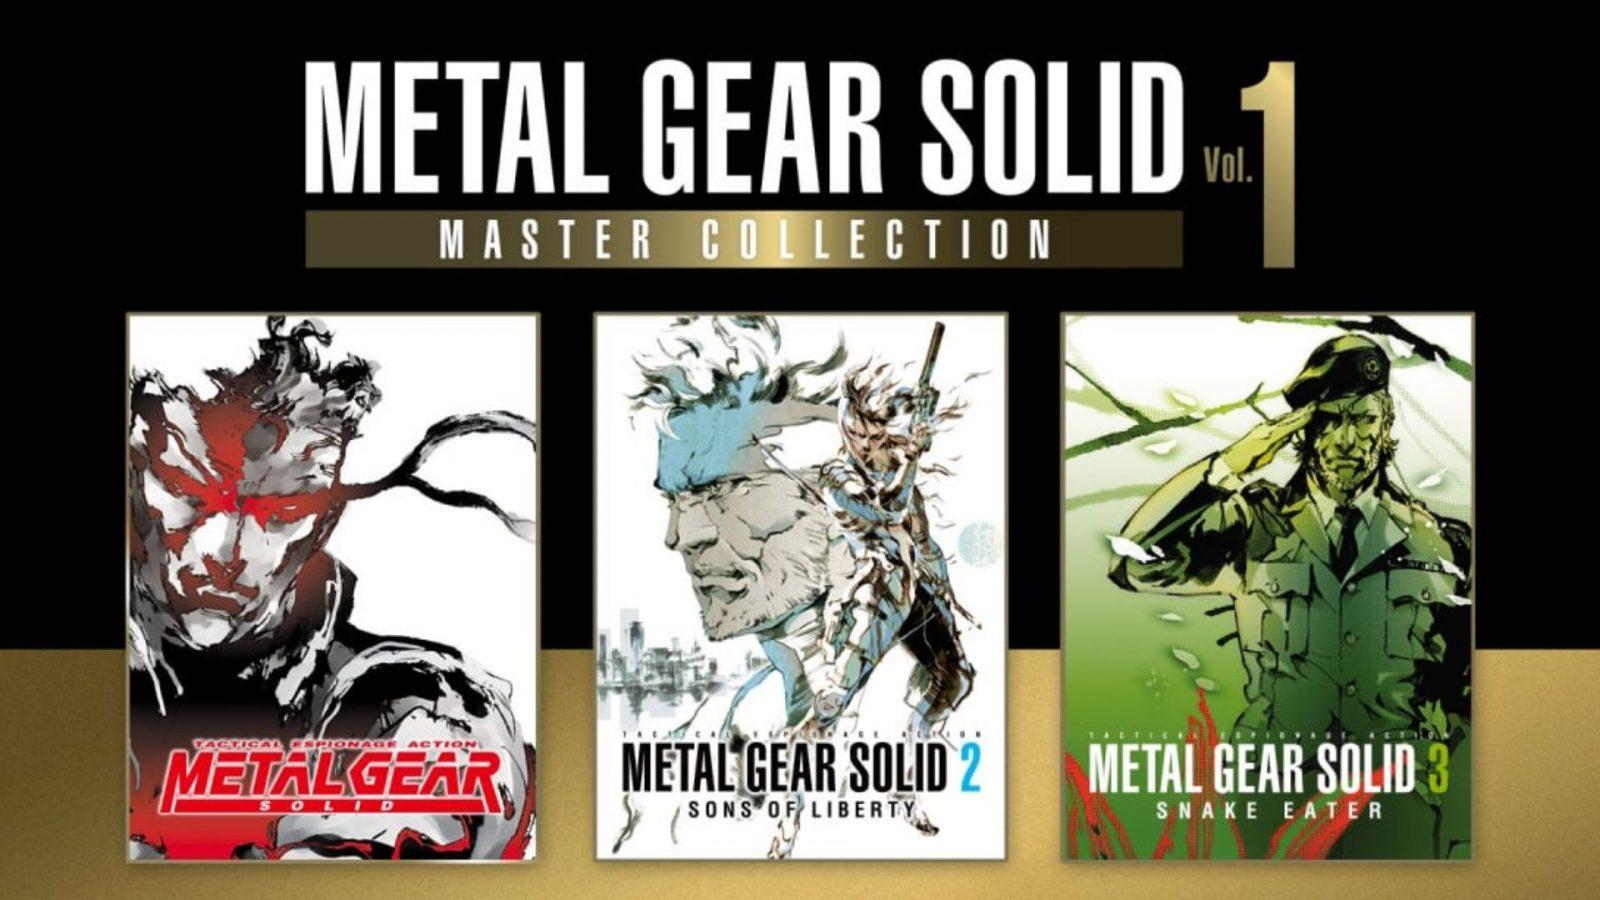 metal gear solid master collection vol. 1 official artwork